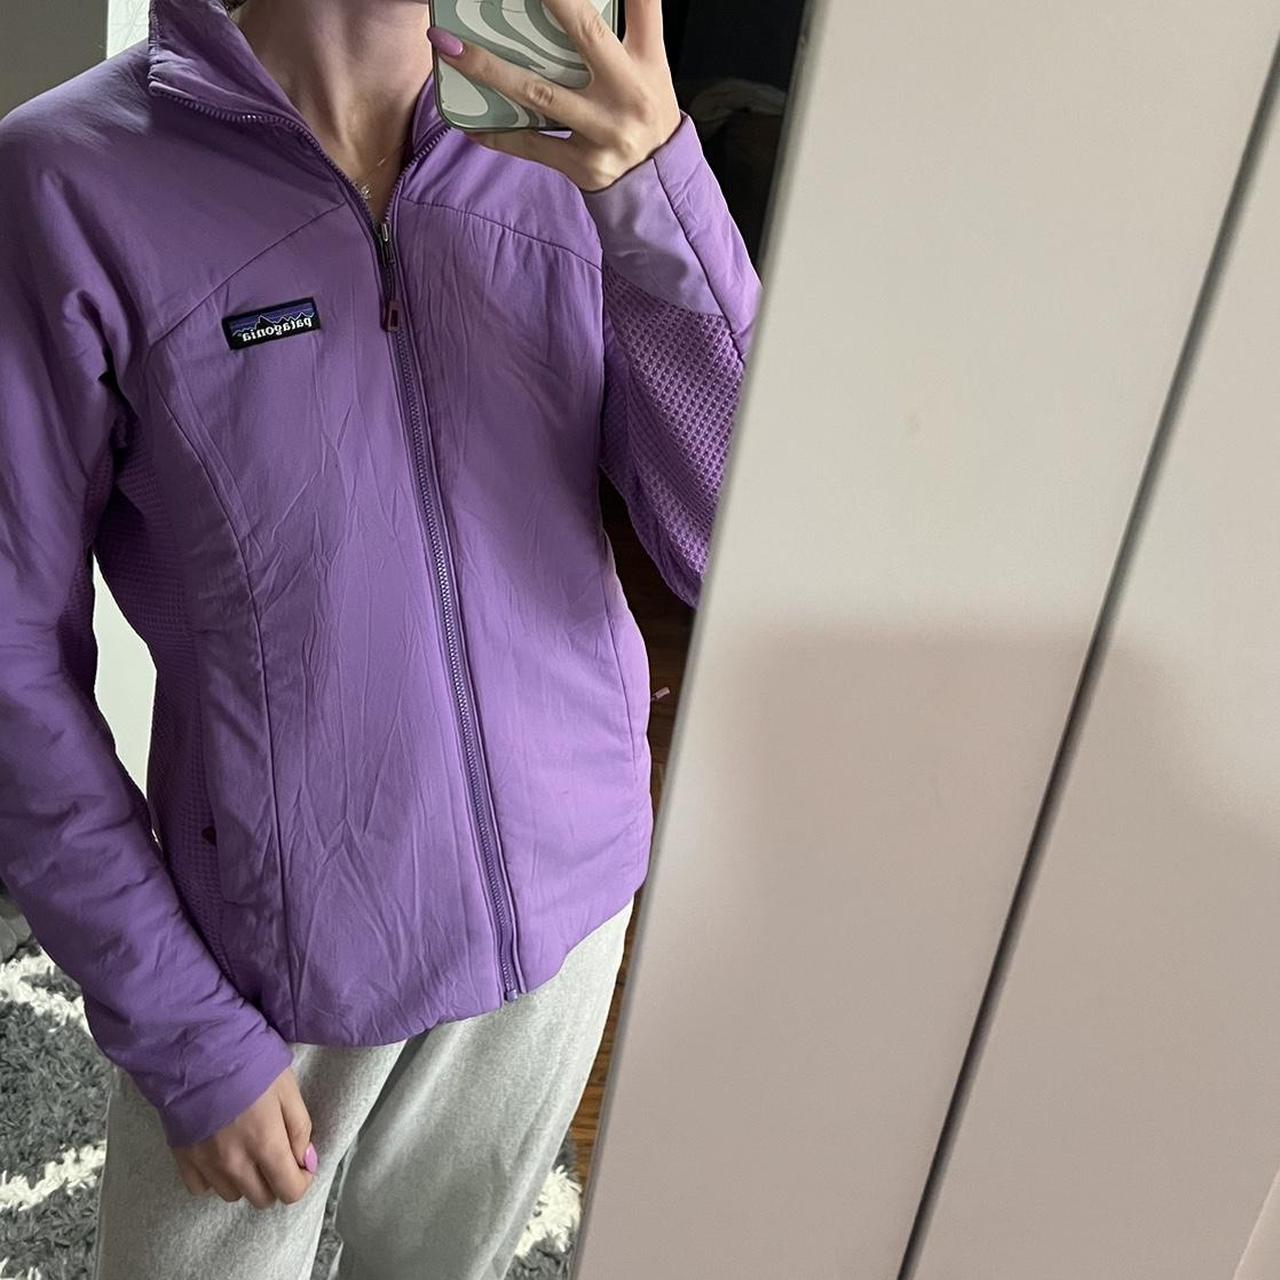 Apana size small purple activewear jacket in perfect - Depop